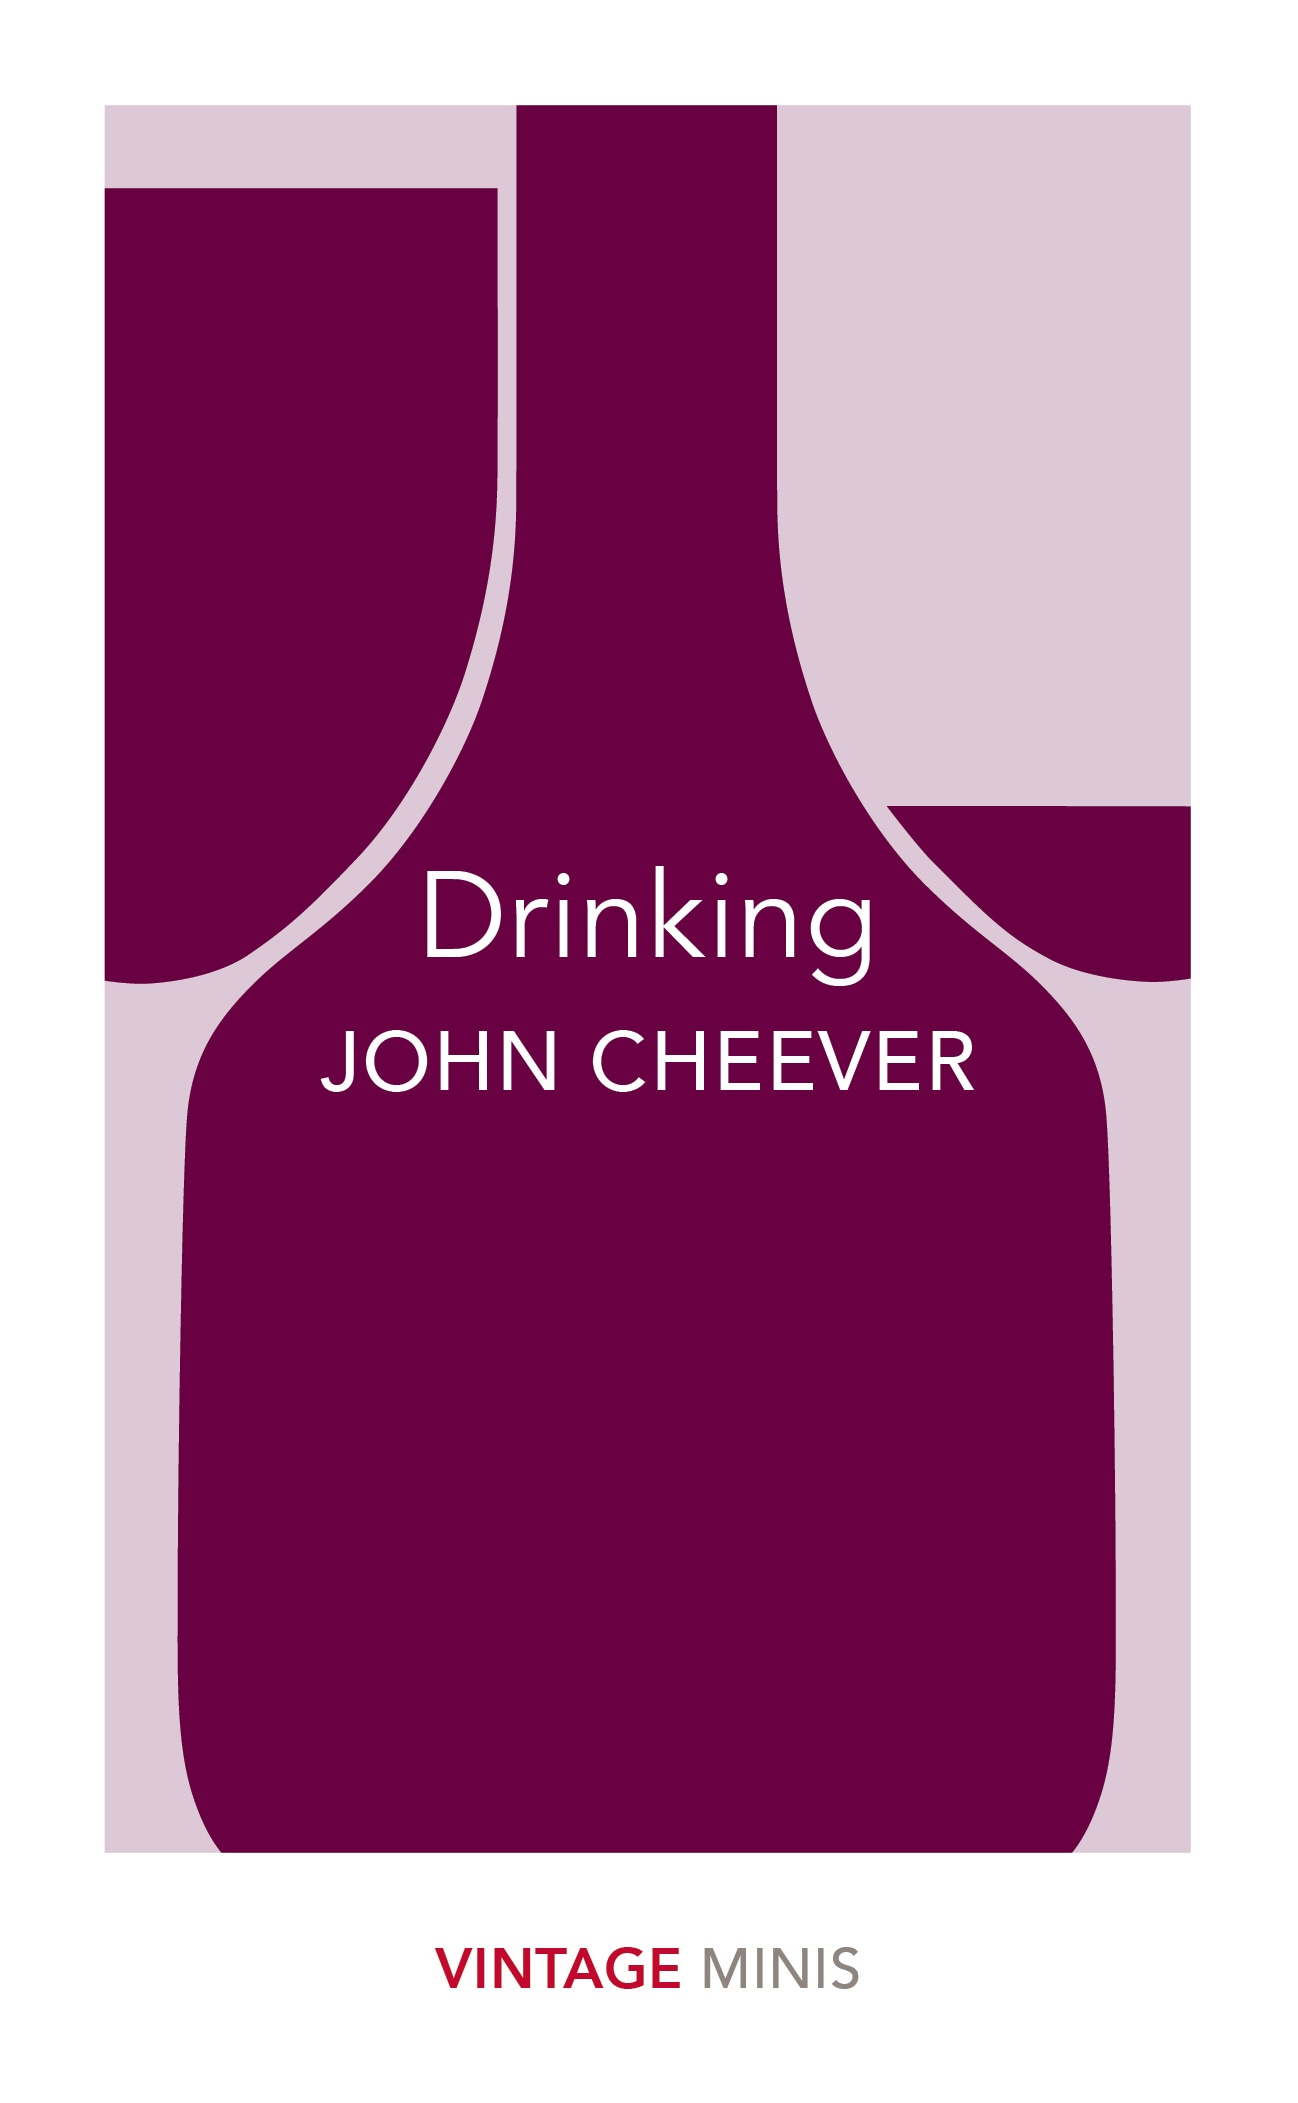 Book “Drinking” by John Cheever — June 8, 2017